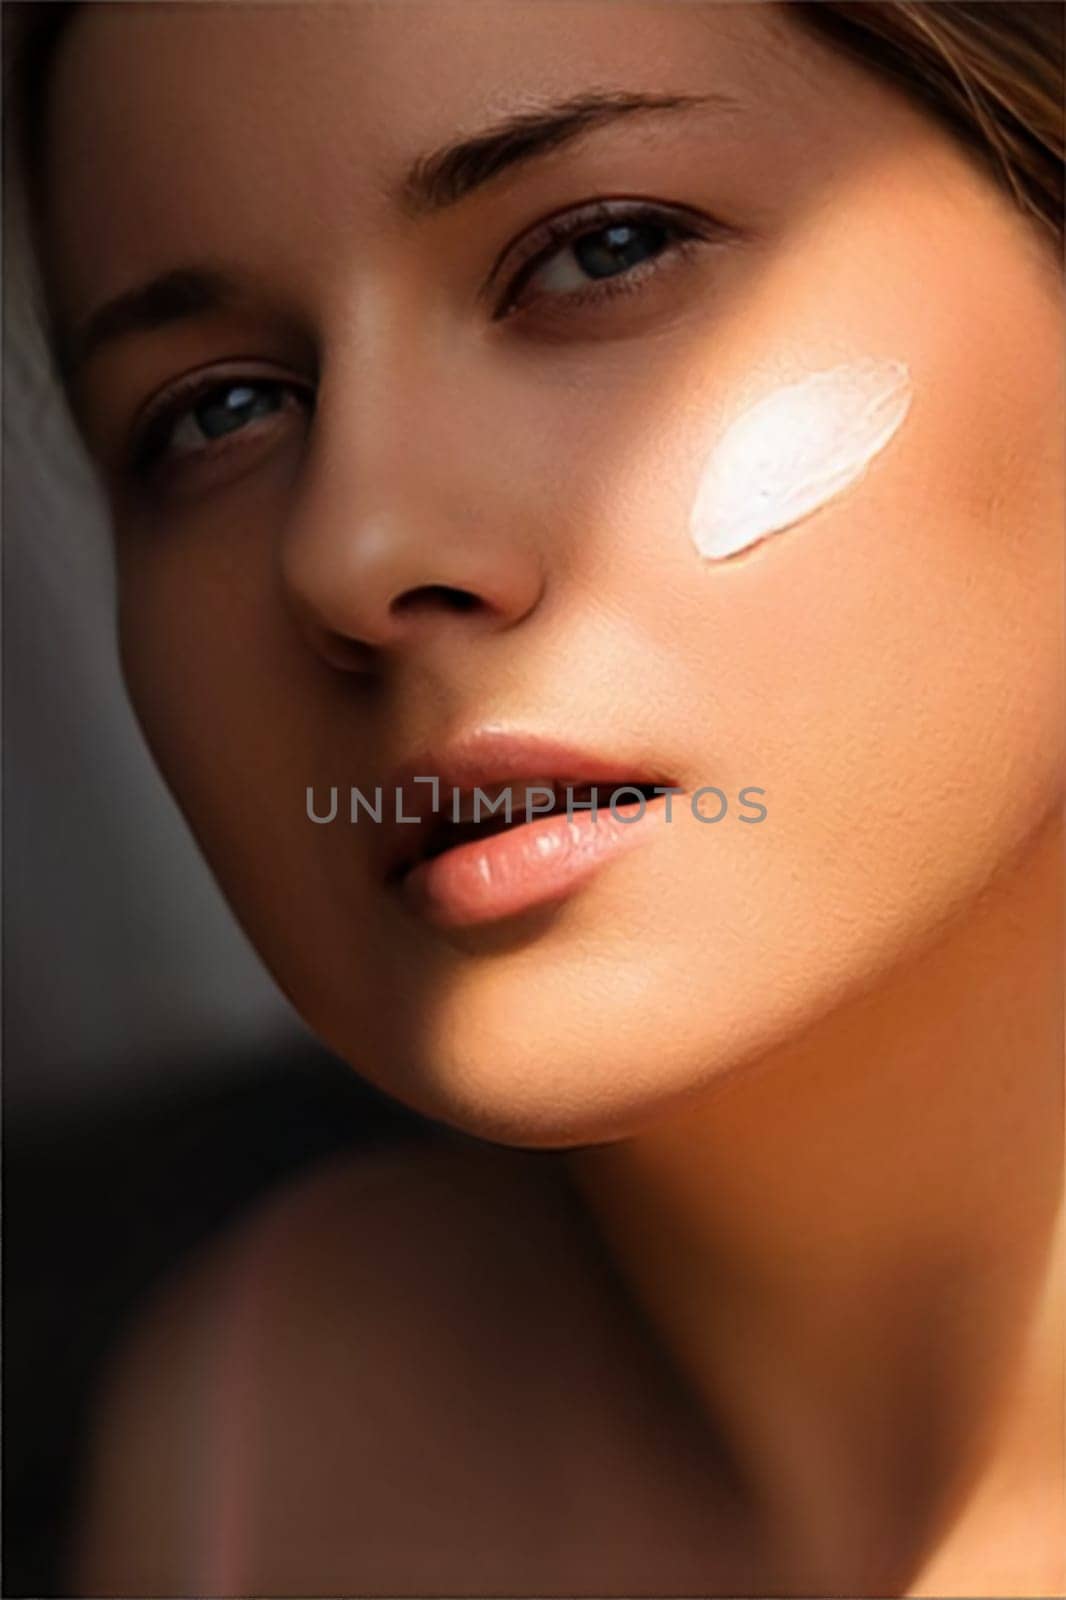 Beauty, suntan spf and skincare cosmetics model face portrait, woman with moisturising cream, sunscreen product or sun tan lotion on her cheek, luxury facial and skin care ad